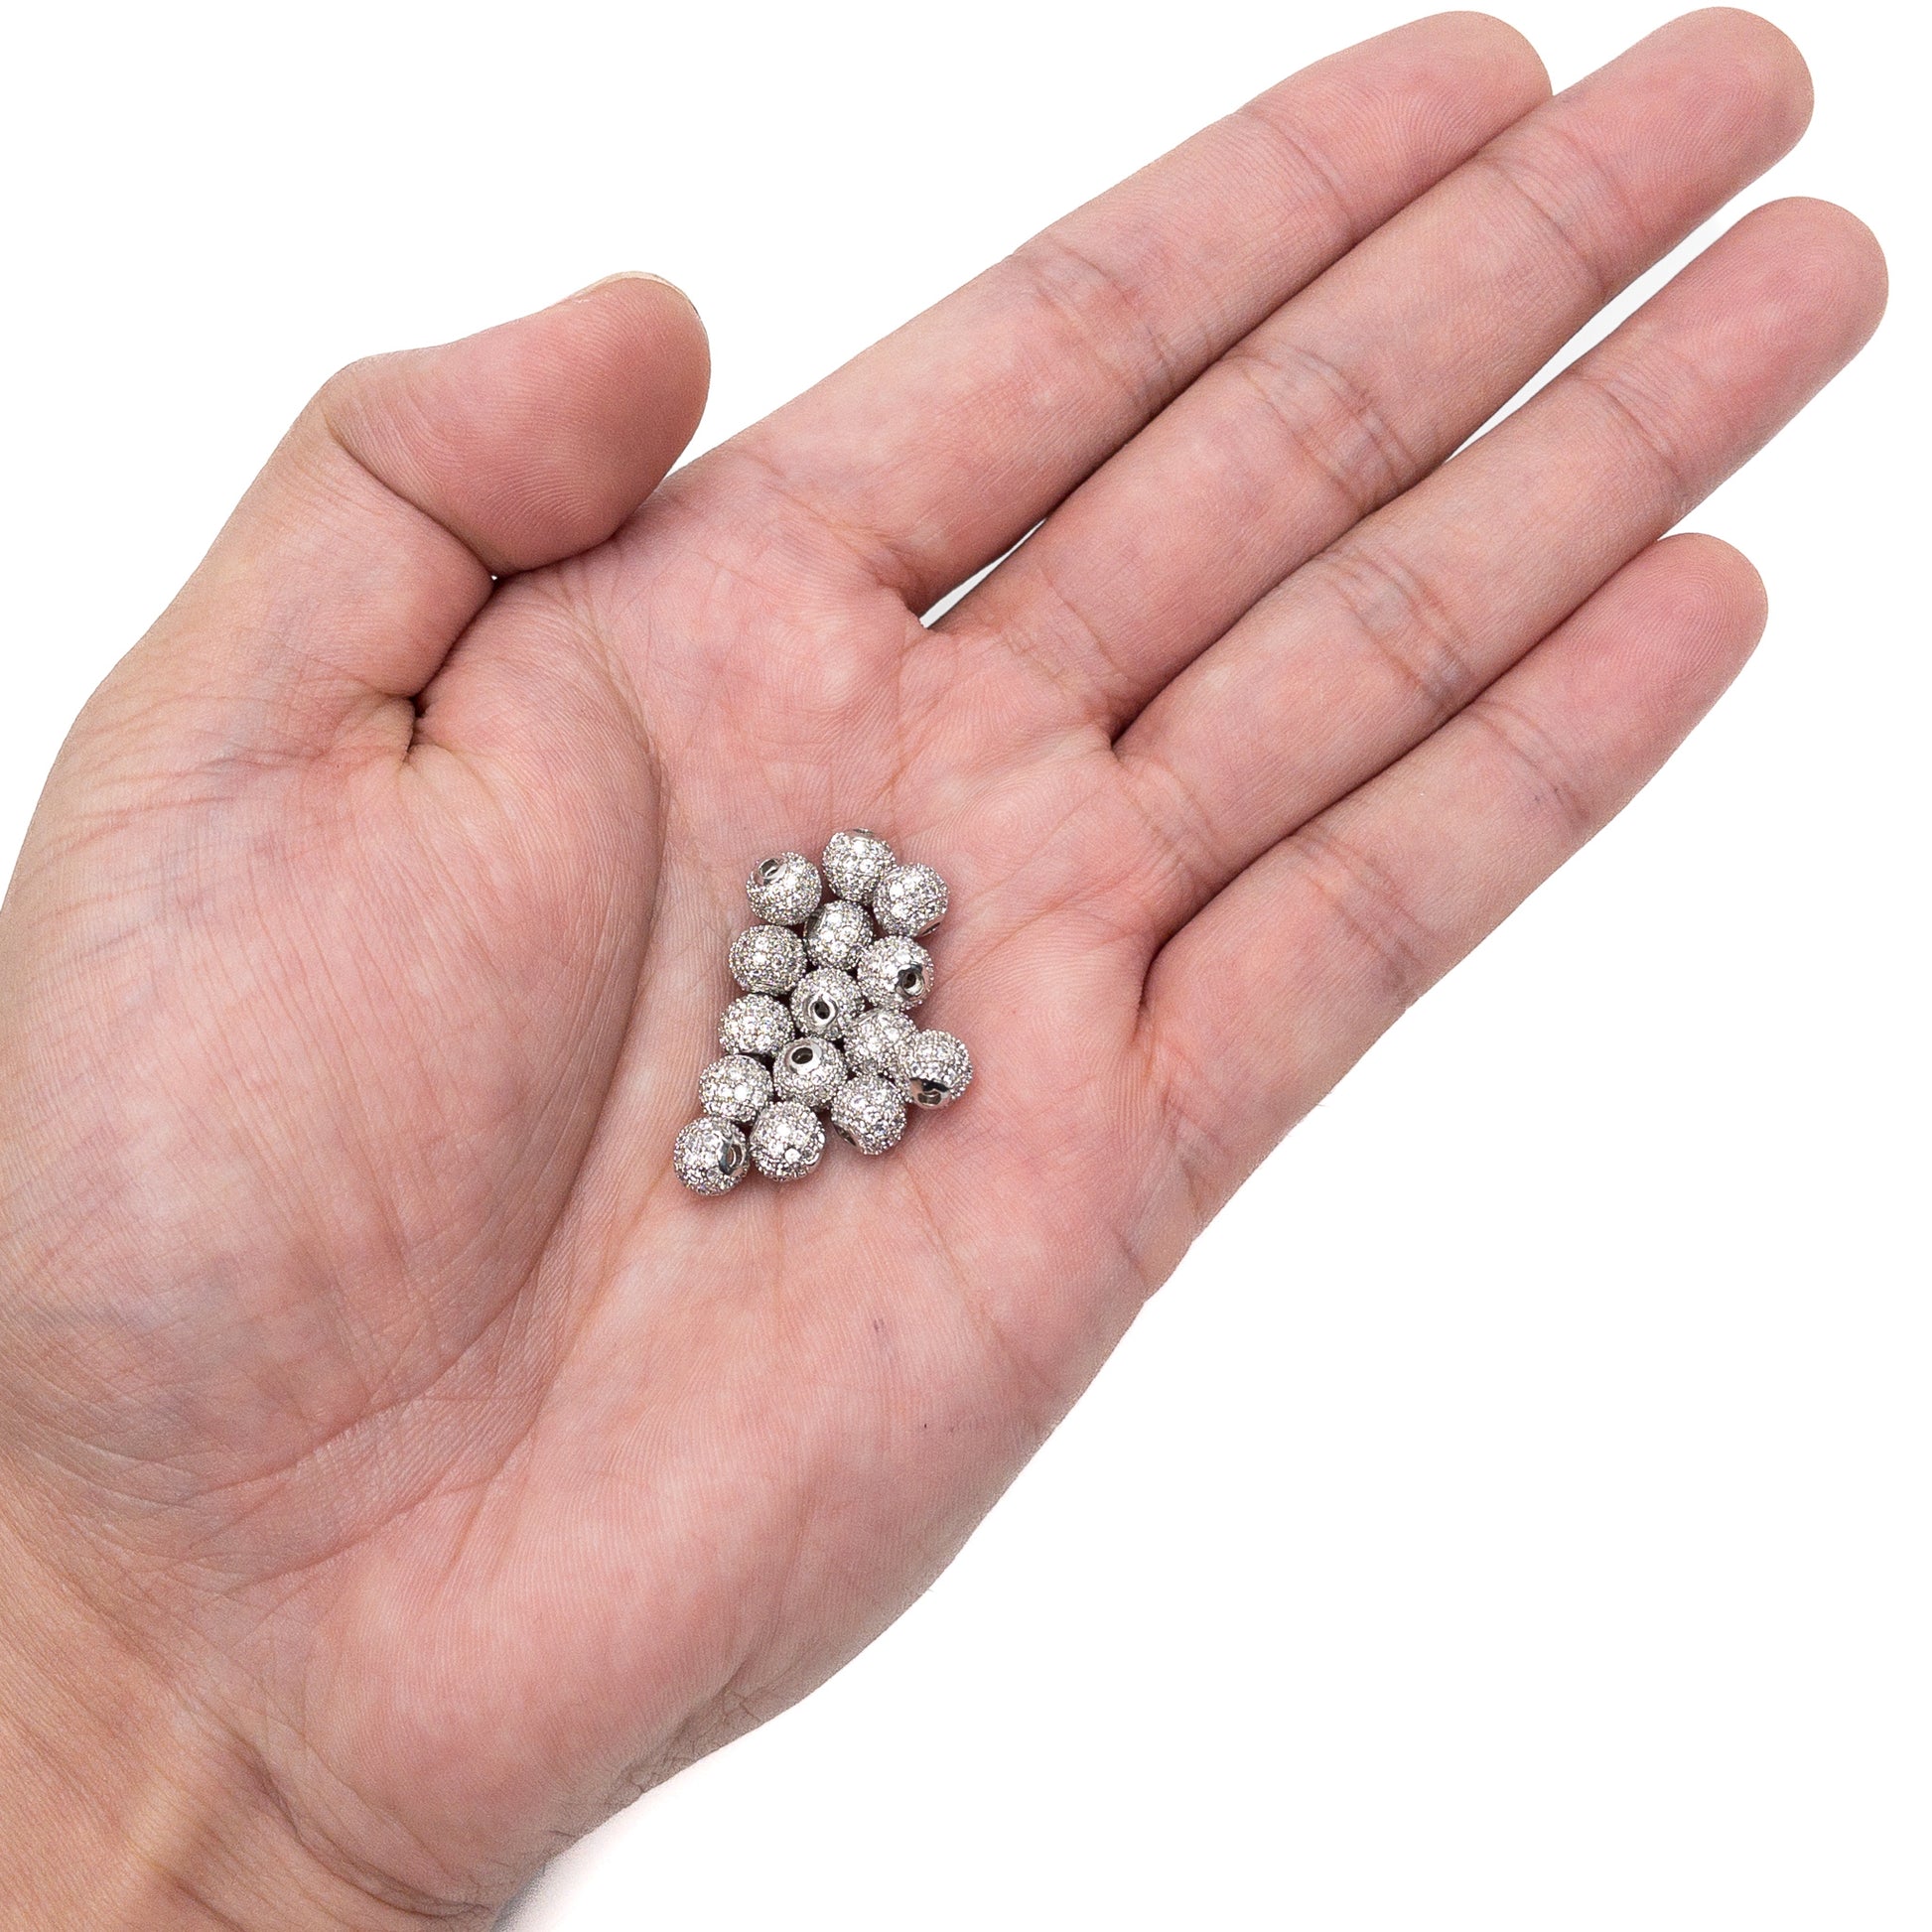 6mm Blingy CZ Micro-Pave Round Bead (2 Colors Available) - 3 pcs.